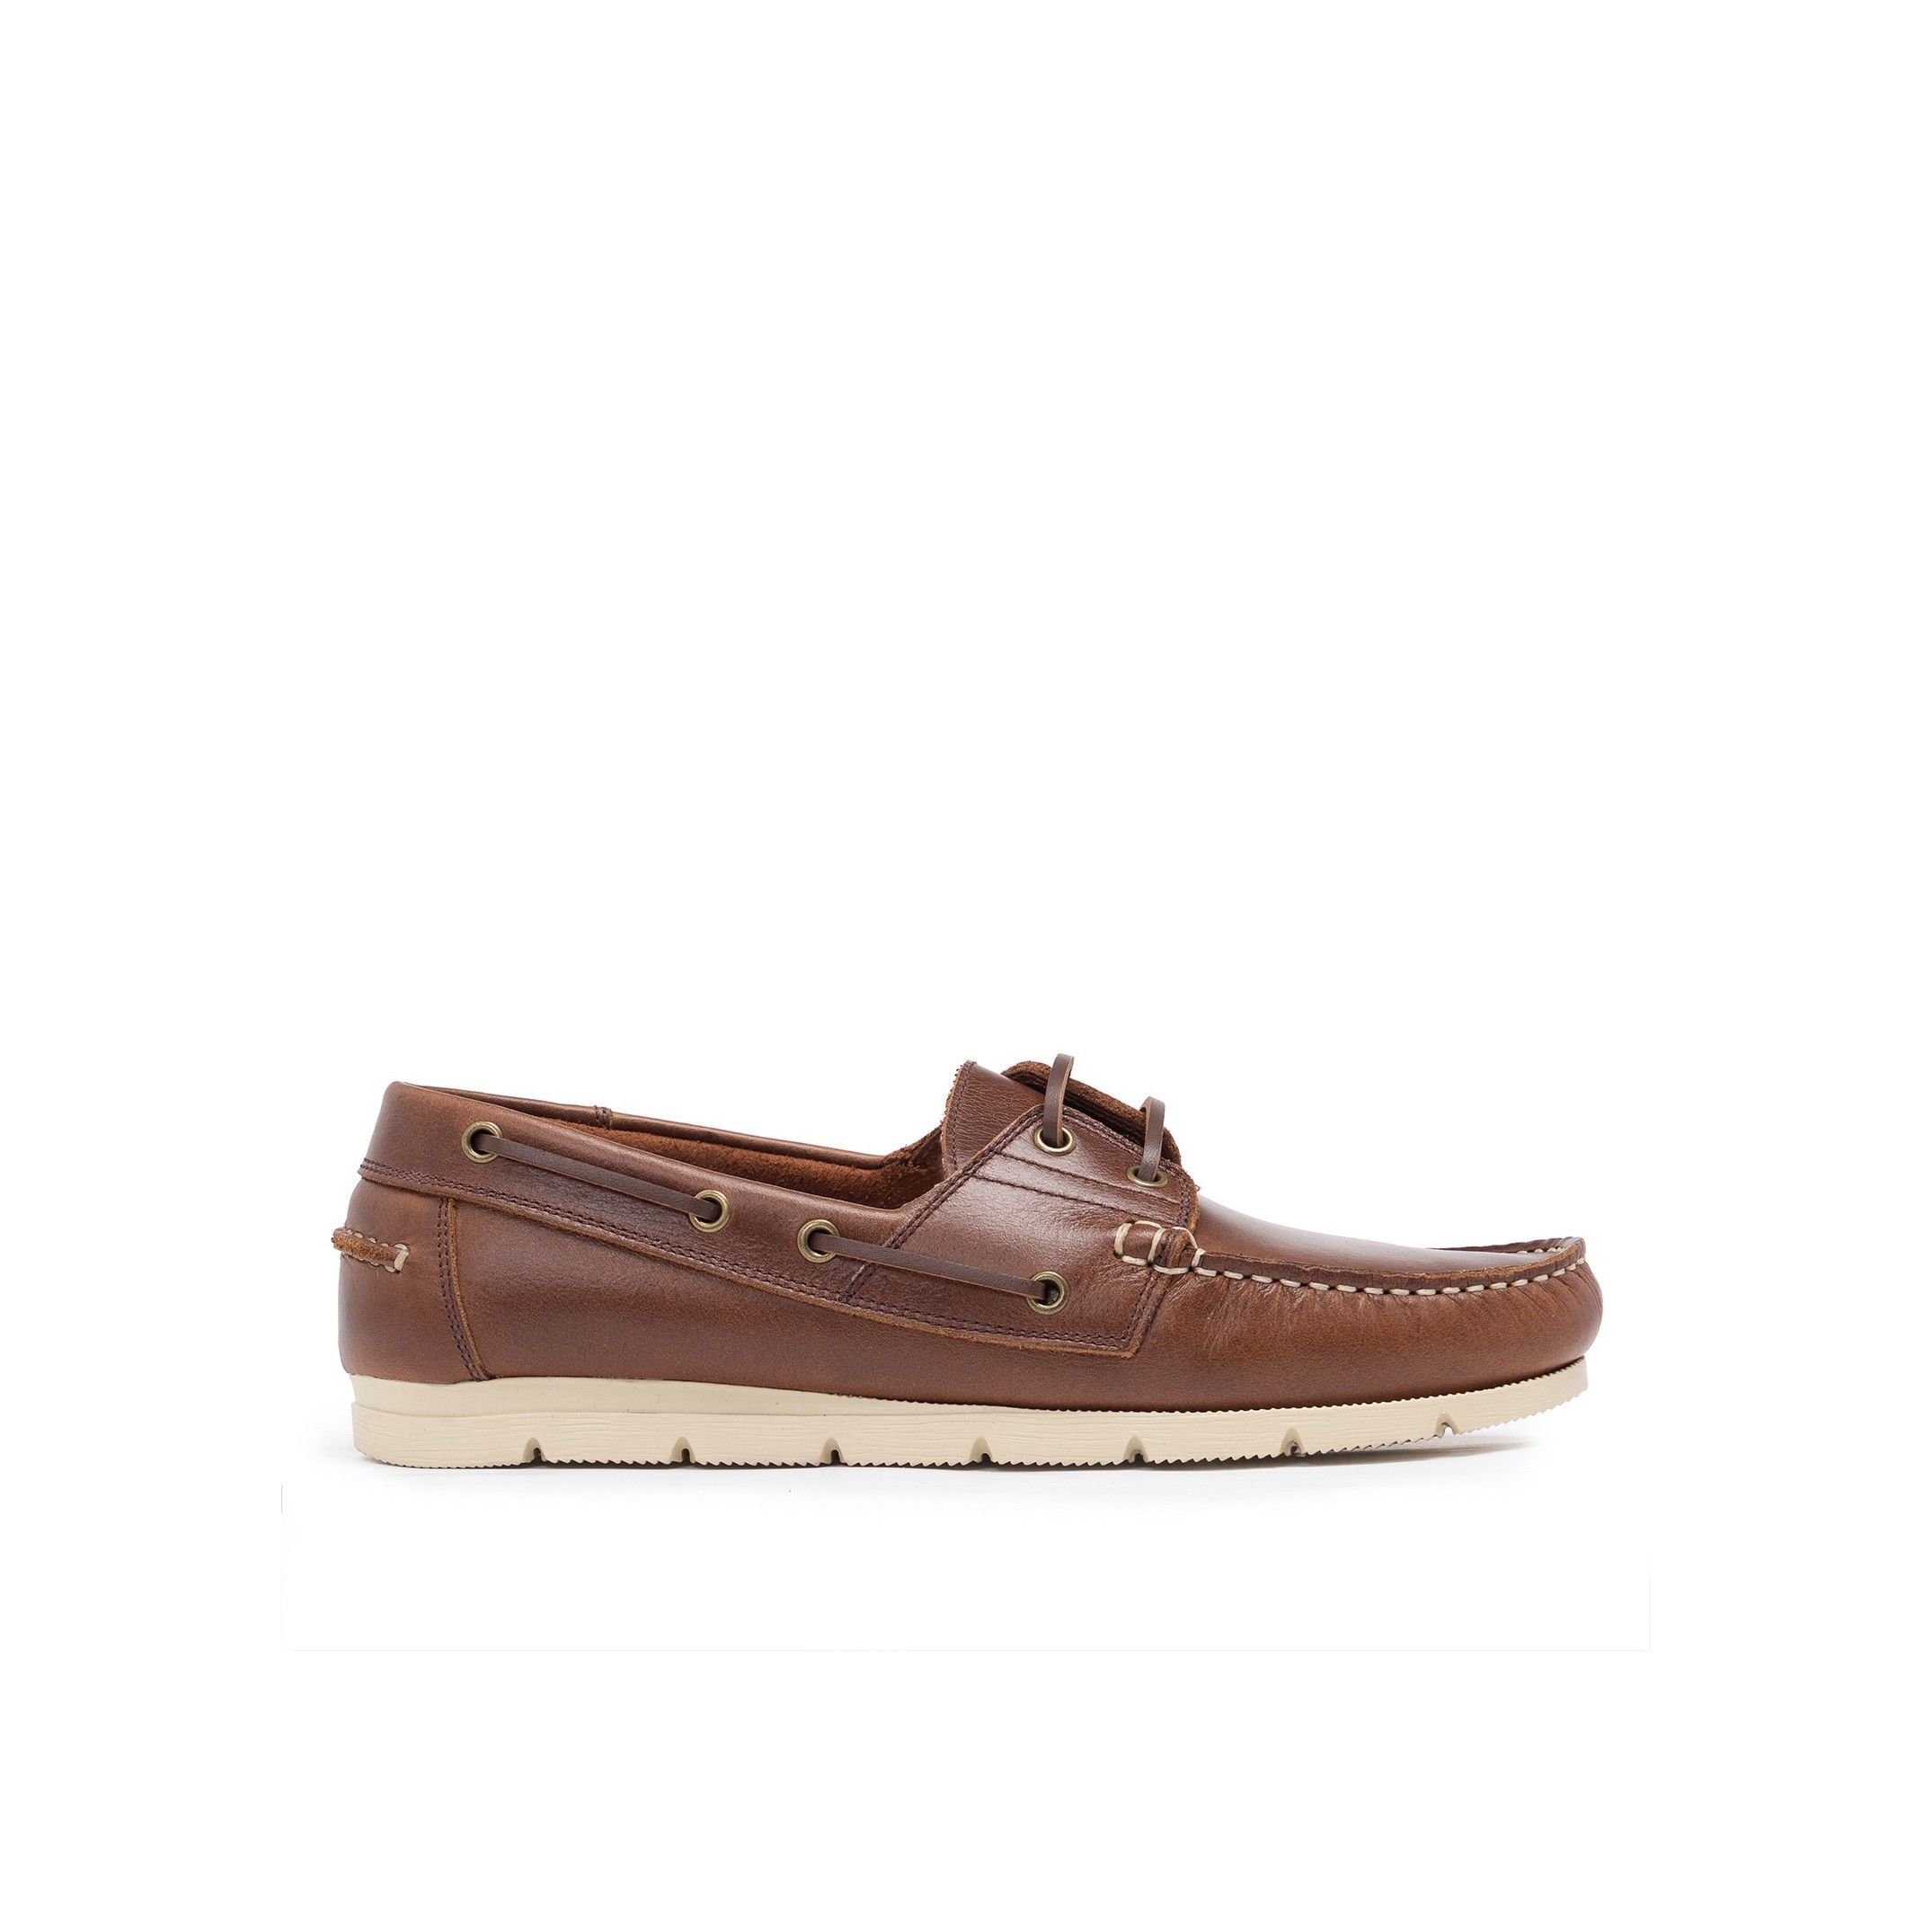 Leather boat shoes, by Son Castellanisimos. Upper made of cowhide leather. Leather Laces closure. Inner and insole made of cowhide leather. Sole material: synthetic and non-slip. Heel height: 1,5 cm. Designed and made in Spain.